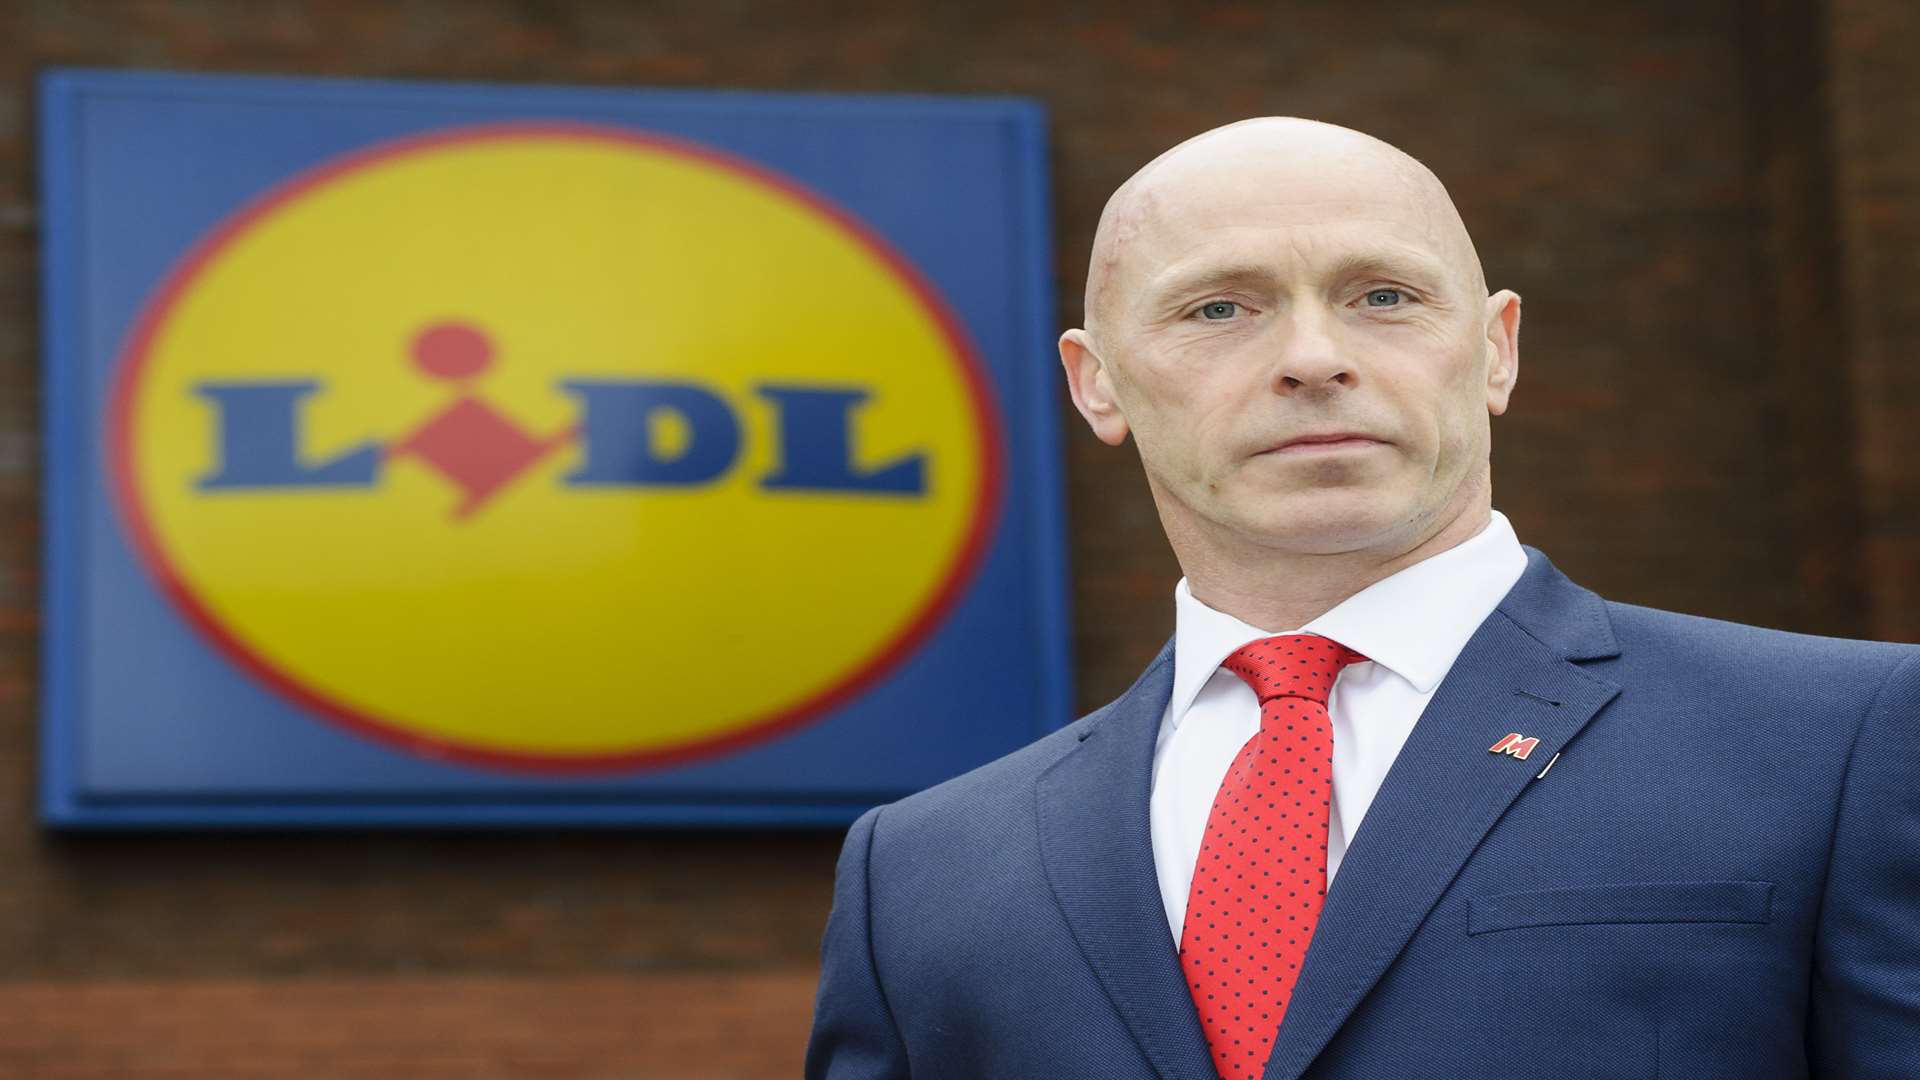 The good Samaritan is urging Lidl to apologise to the man once he's found. Picture: Andy Payton